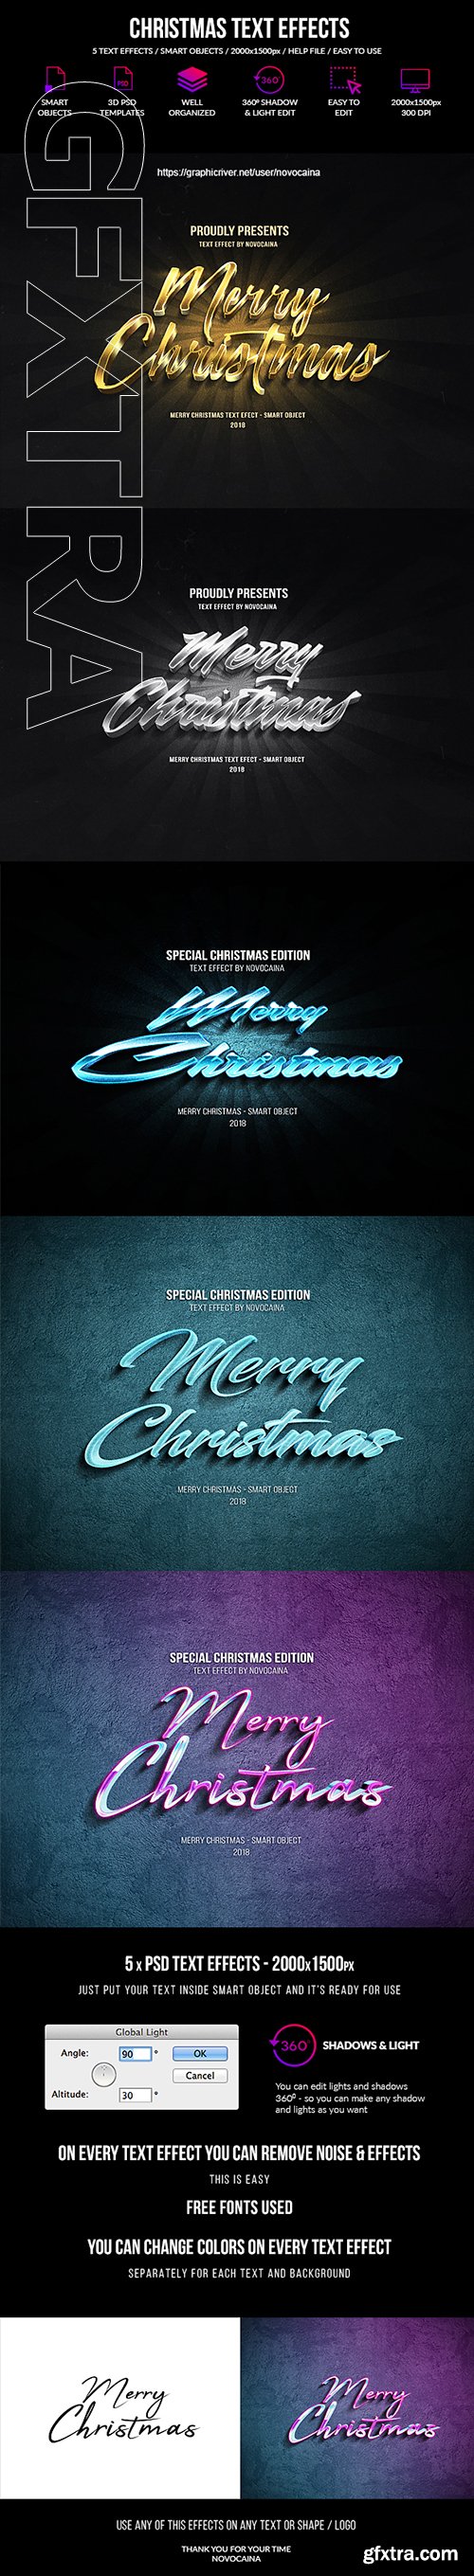 GraphicRiver - Christmas Text Effects 22809260